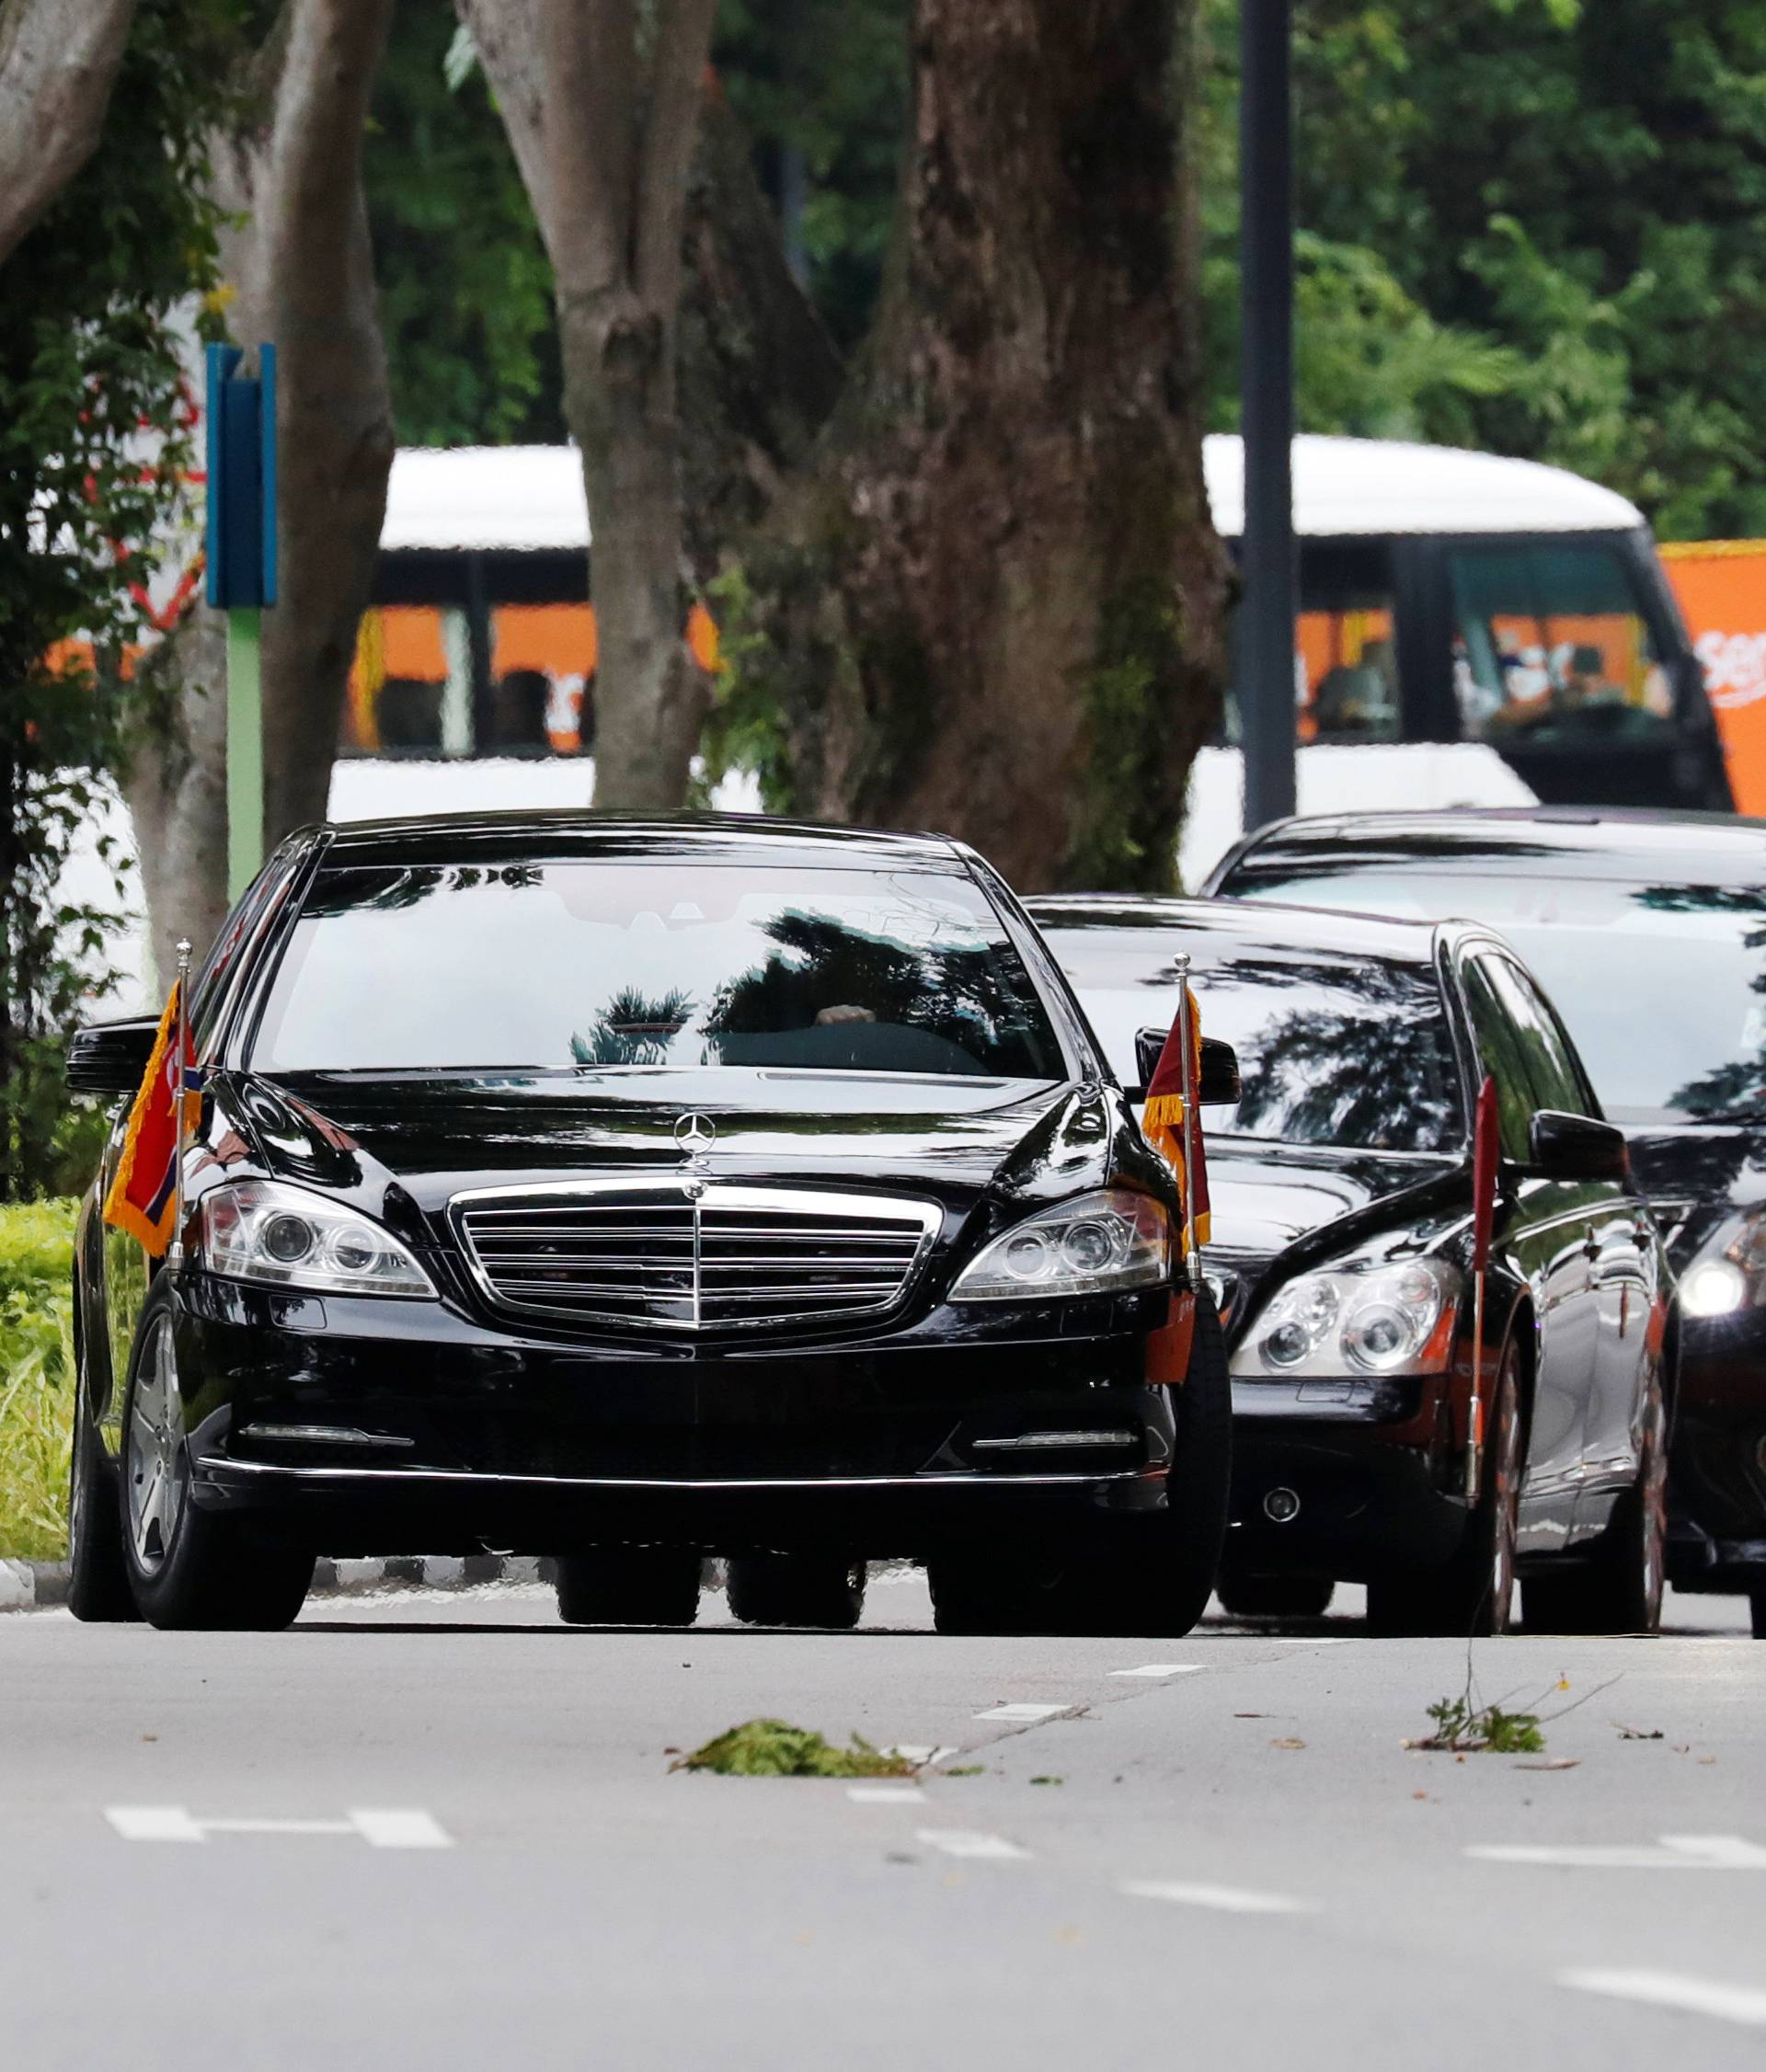 The motorcade of North Korea's leader Kim Jong Un arrives at the Capella hotel, the venue of the summit between North Korea and the U.S., on Sentosa island in Singapore